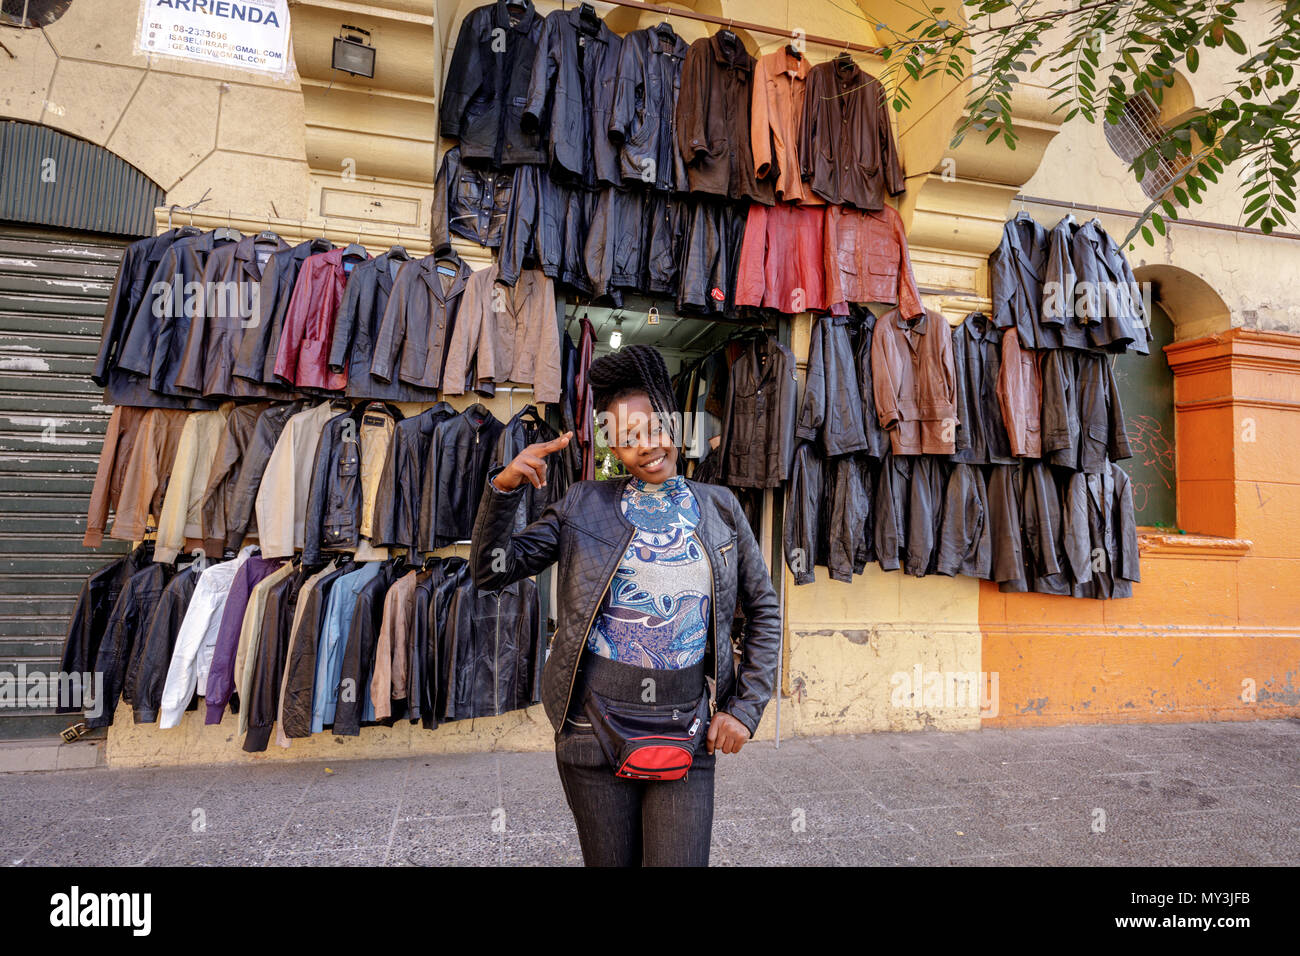 Santiago, Chile: A woman vendor of leather jackets. Stock Photo